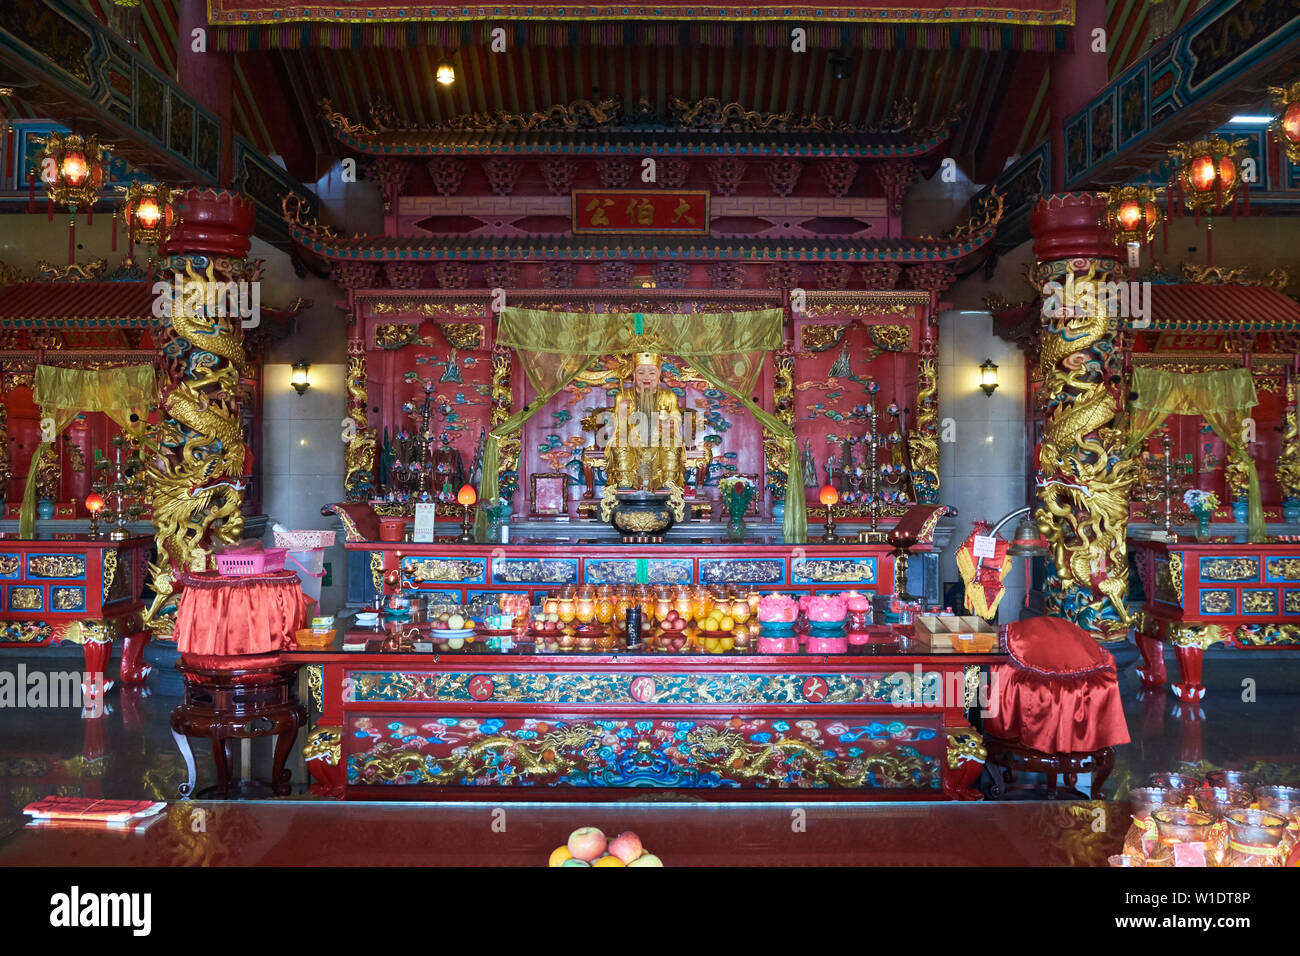 Interior view of the central altar at Tua Pek Kong Chinese temple in Bintulu, Borneo, Malaysia. Stock Photo